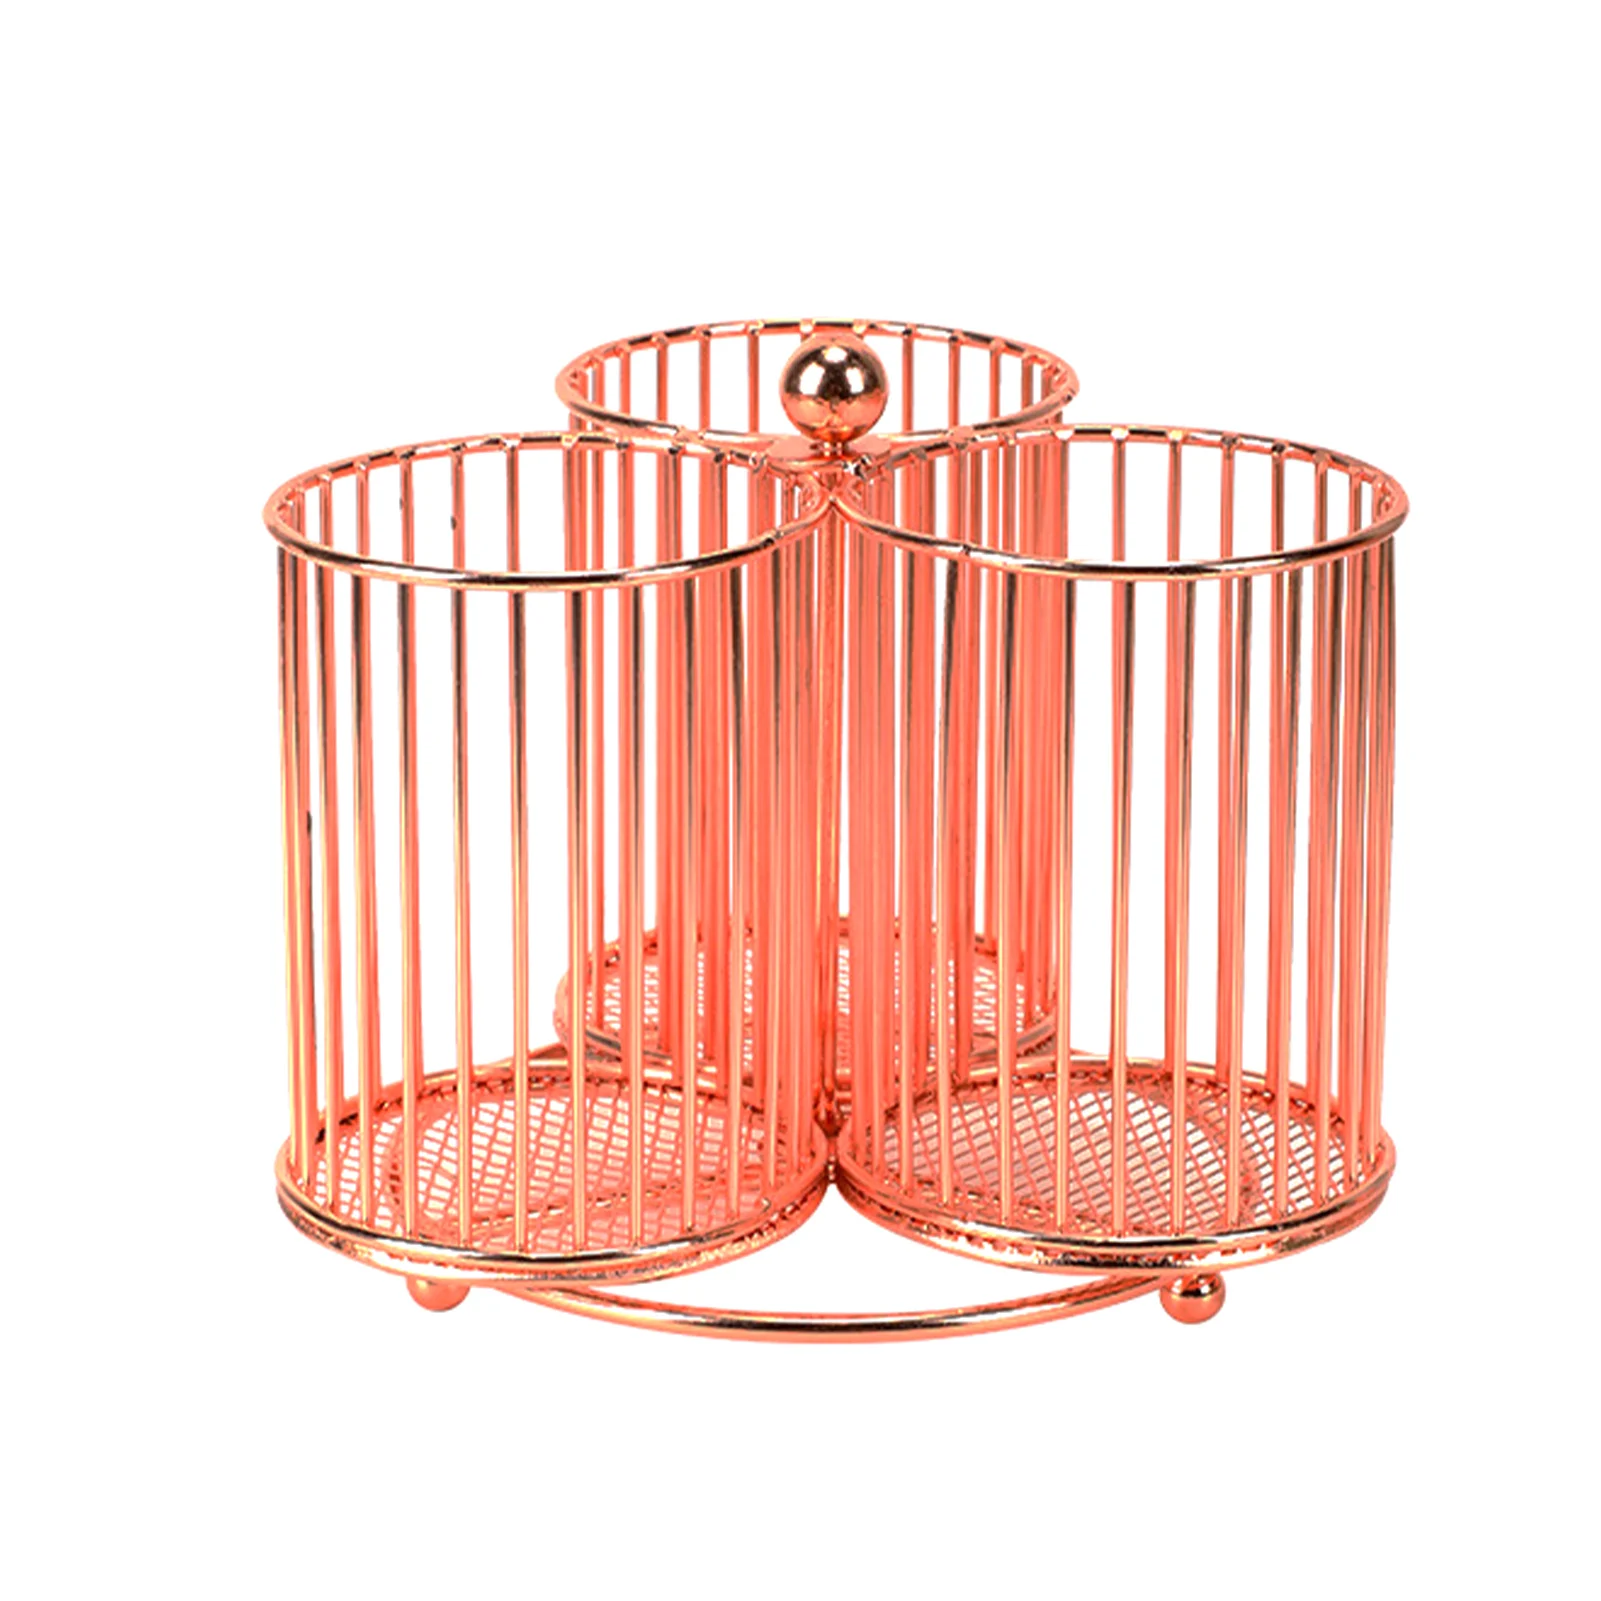 

Storage Marker Large Capacity Stationery Hollowed Out 3 Sections Desk Organizer 360 Degree Rotation Pencil Holder Rose Gold